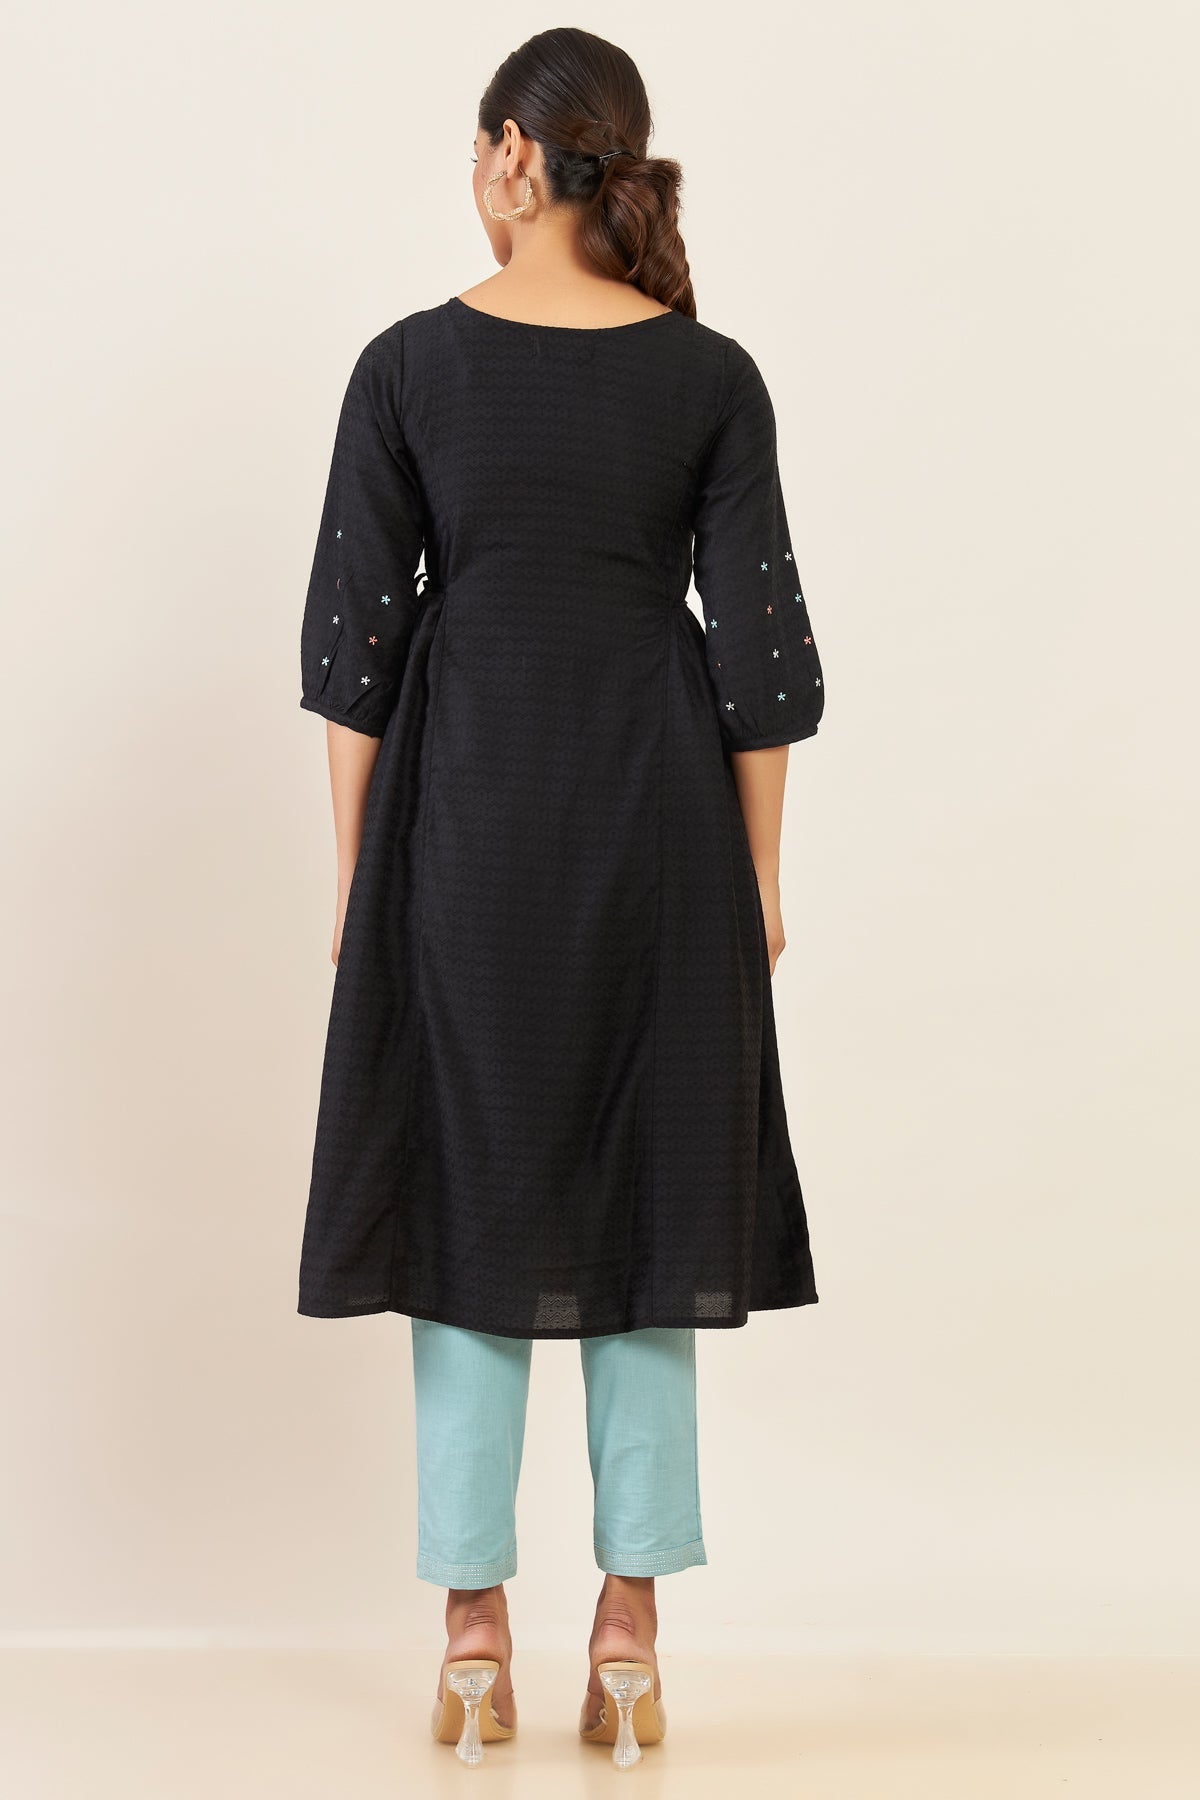 Contrast Floral Embroidery & All Over Chevron Kurta- Black